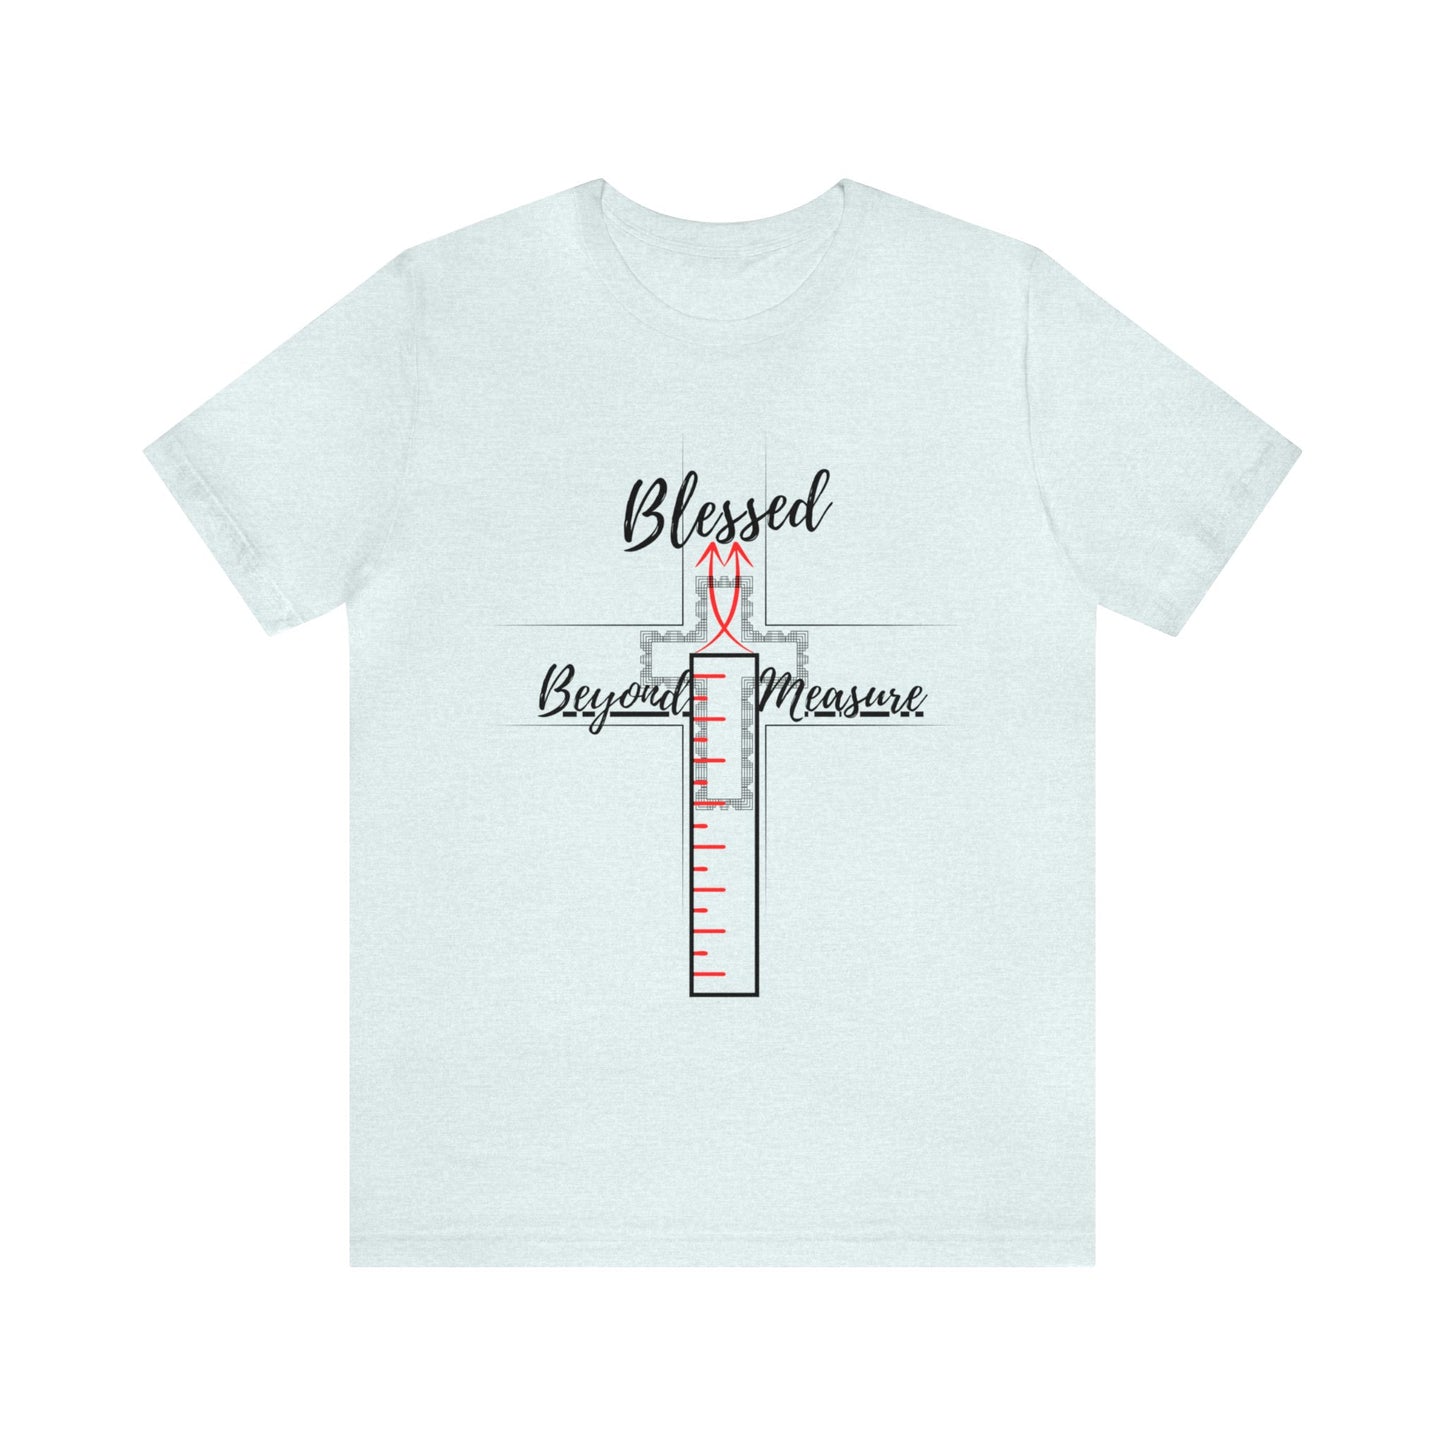 Blessed Beyond Measure! [Indeed you are!] Unisex T-Shirt